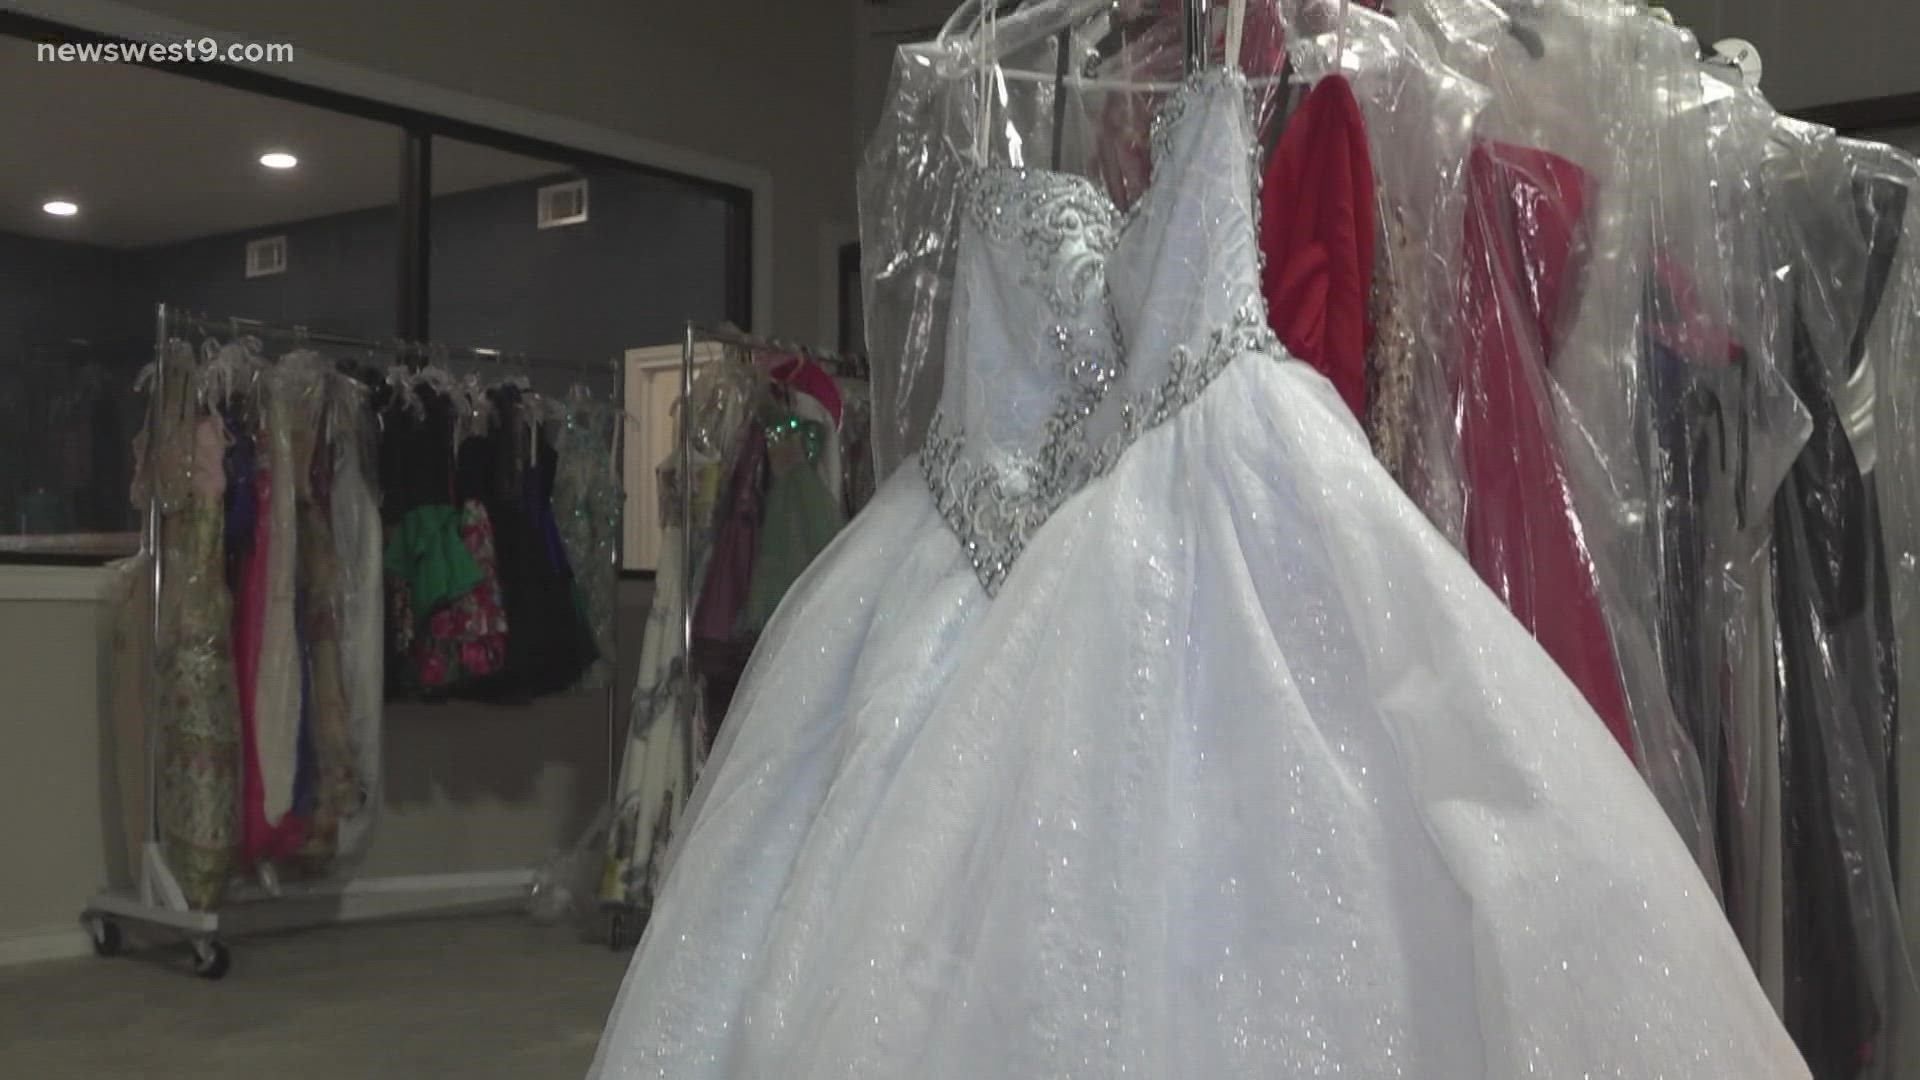 Local non-profit organization, 3:11 Ministries, is giving away free prom dresses, shoes and accessories to local girls who can't afford it for prom night.